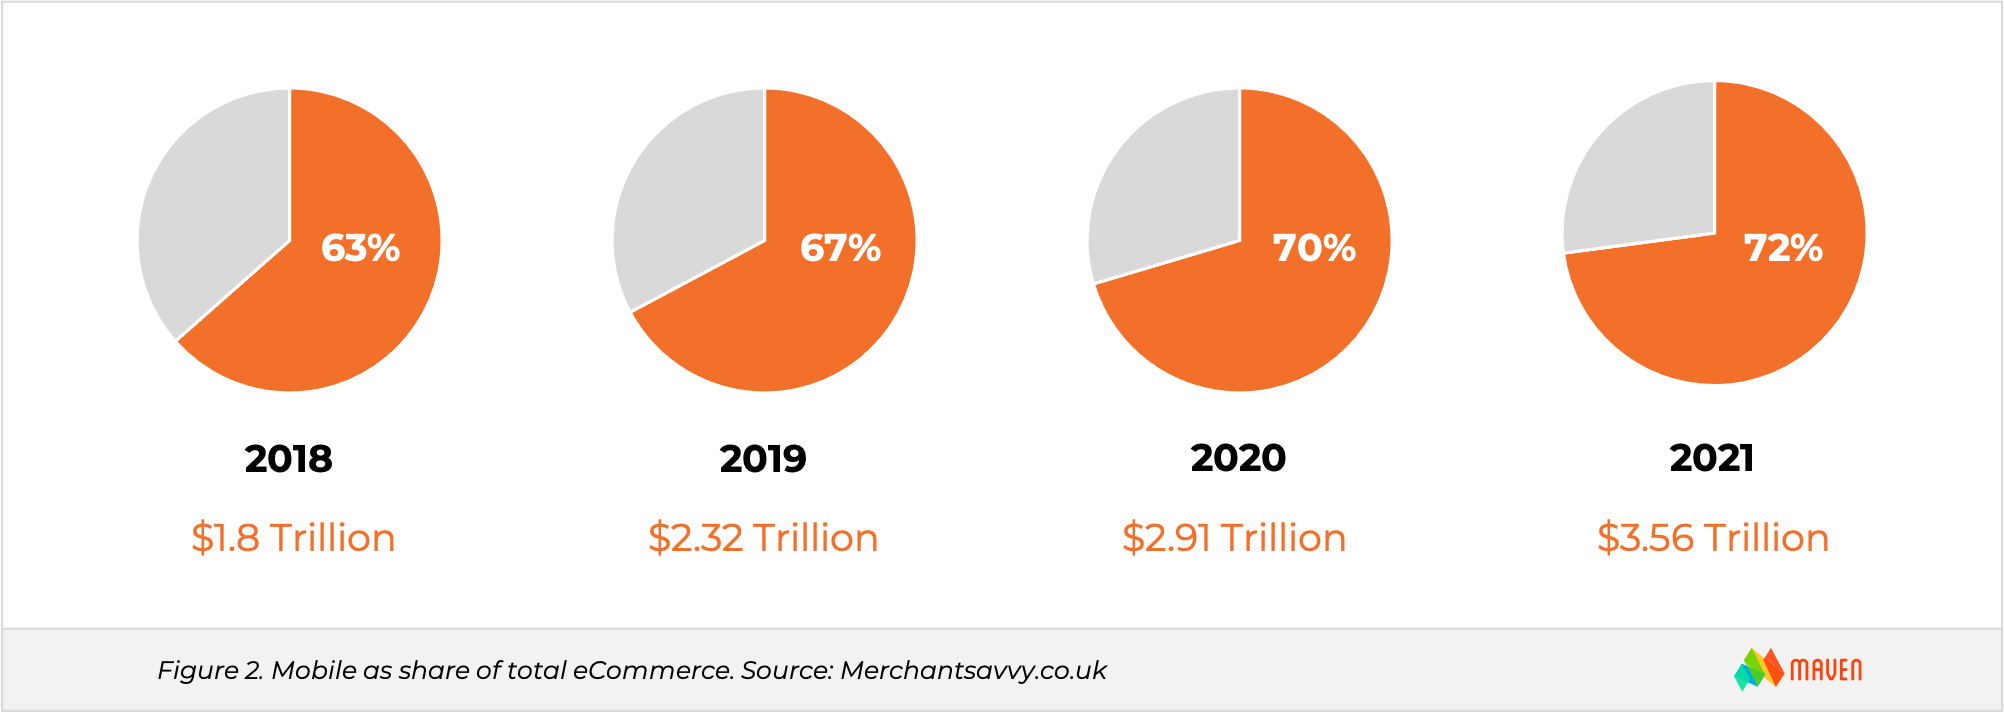 2021 eCommerce Trends - Mobile Sales Growth